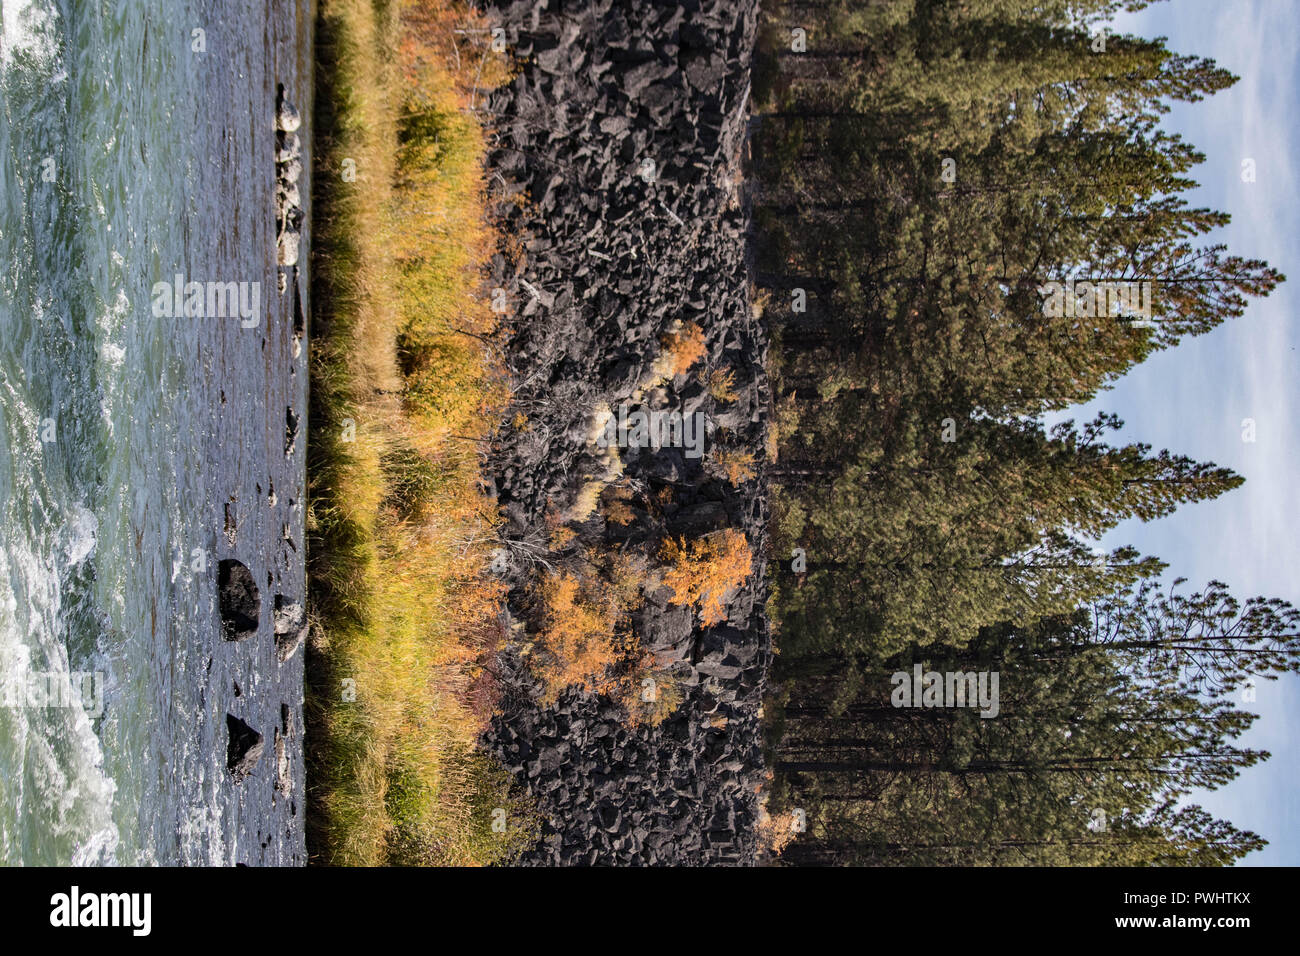 A talus slope gives way to bright fall foliage on the bank of the Deschutes River in Oregon. Stock Photo